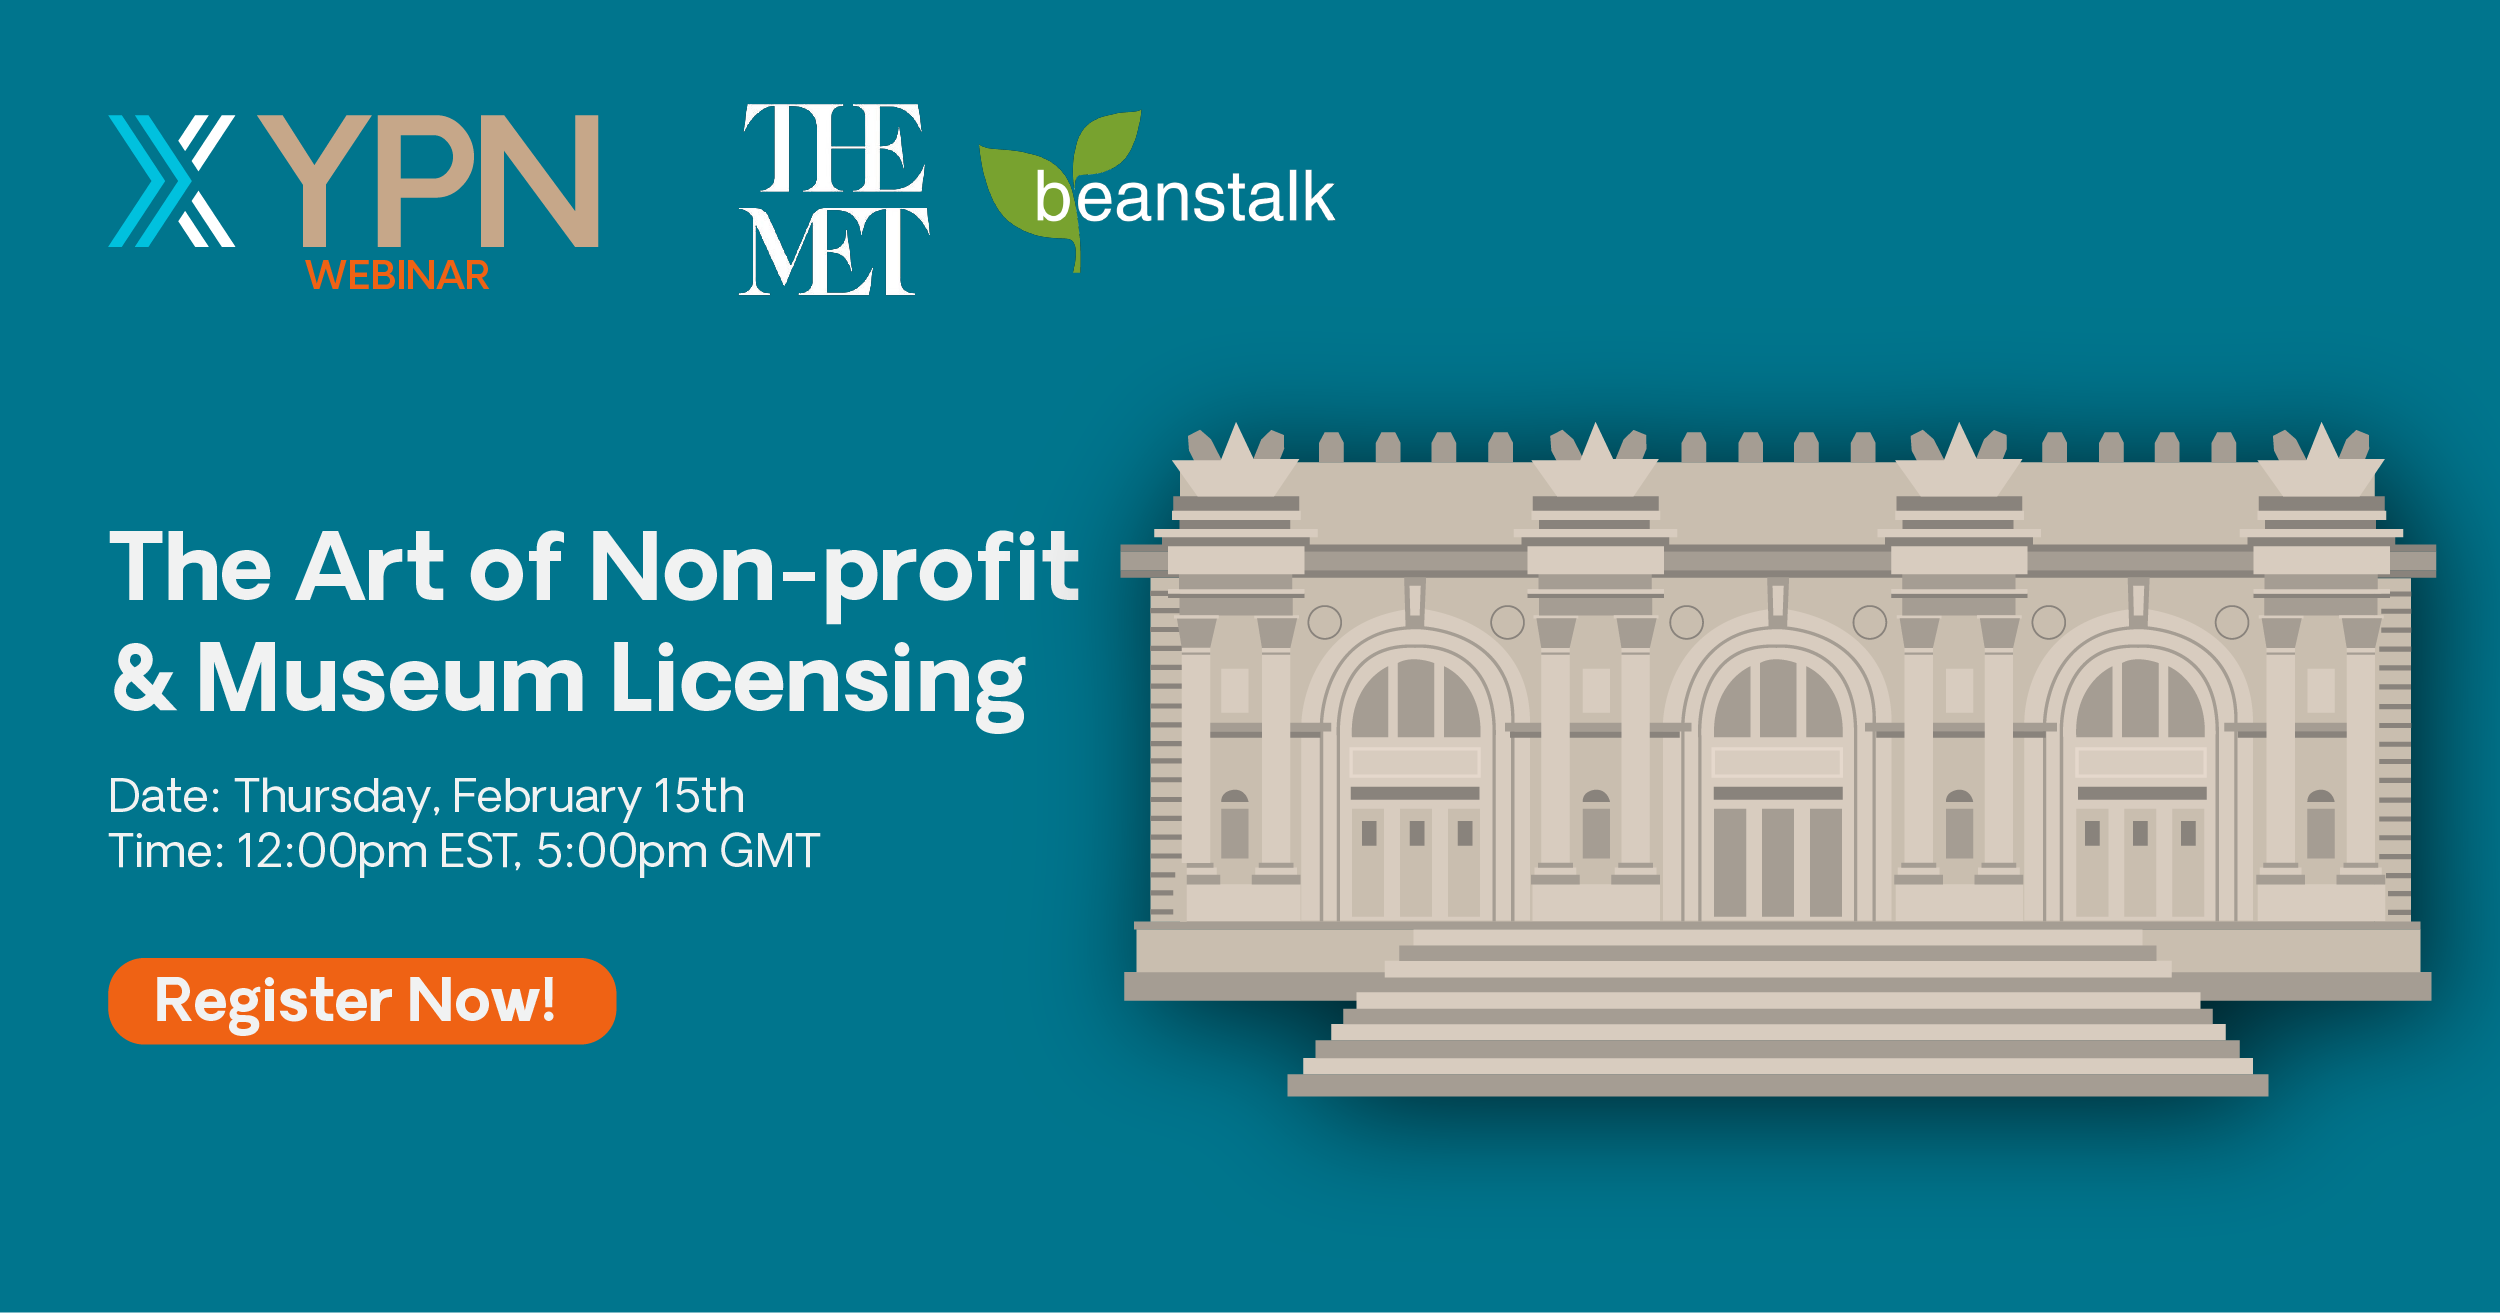 YPN: The Art of Non-profit & Museum Licensing image